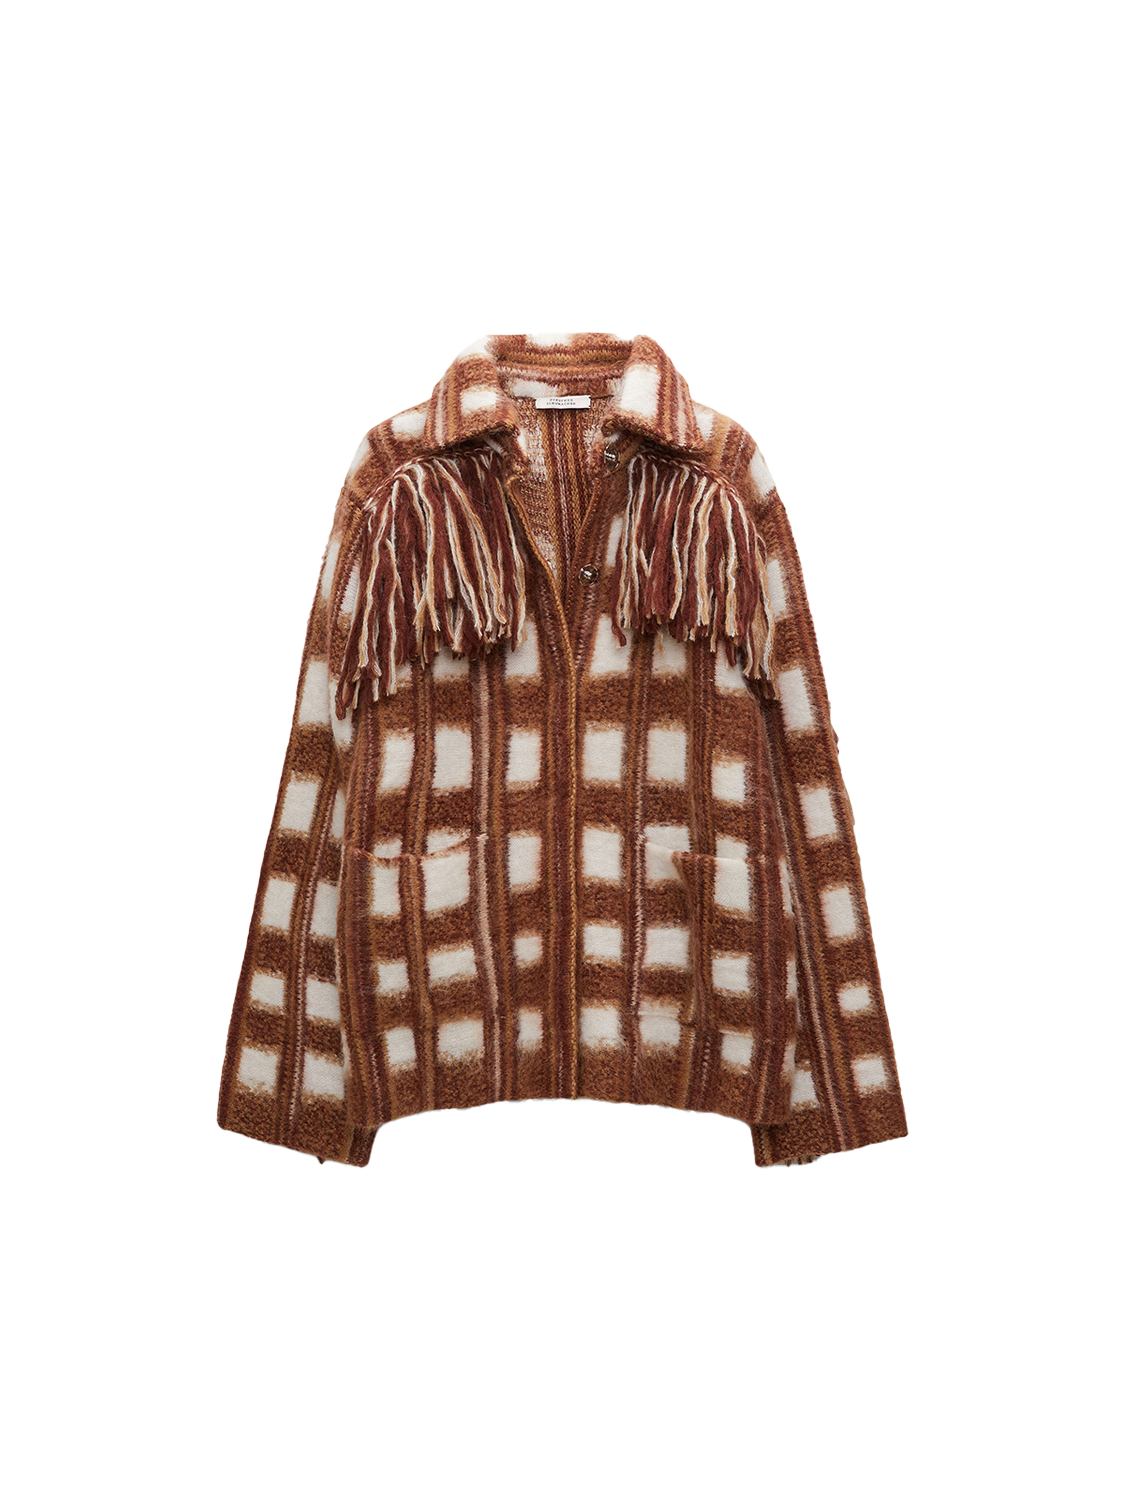 Dorothee Schumacher Dizzy Check cardigan with fringe details  brown S